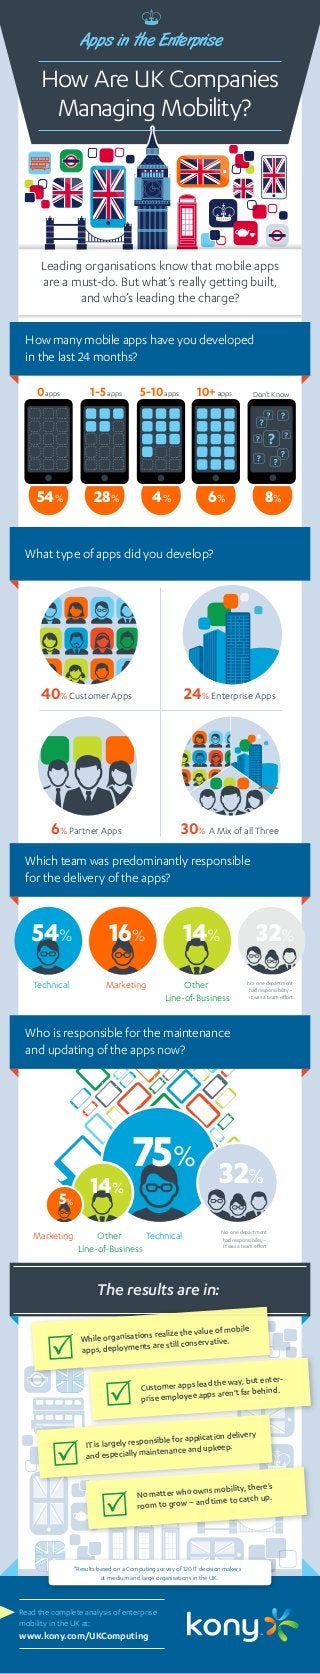 How Are UK Companies
Managing Mobility?
Apps in the Enterprise
How many mobile apps have you developed
in the last 24 months?
8%54% 28% 4% 6%
Don’t Know0apps 1-5apps 5-10apps 10+apps
TechnicalMarketing Other
Line-of-Business
No one department
had responsibility–
it was a team eﬀort
No one department
had responsibility–
it was a team eﬀort
32%
Technical
54%
Marketing
16%
Other
Line-of-Business
14%
75%
14%
5%
32%
Who is responsible for the maintenance
and updating of the apps now?
The results are in:
24% Enterprise Apps
30% A Mix of all Three
40% Customer Apps
6% Partner Apps
What type of apps did you develop?
Which team was predominantly responsible
for the delivery of the apps?
While organisations realize the value of mobile
apps, deployments are still conservative.
R
Customer apps lead the way, but enter-
prise employee apps aren’t far behind.
R
IT is largely responsible for application delivery
and especially maintenance and upkeep.
R
No matter who owns mobility, there’s
room to grow – and time to catch up.
R
*Results based on a Computing survey of 120 IT decision makers
at medium and large organisations in the UK.
Leading organisations know that mobile apps
are a must-do. But what’s really getting built,
and who’s leading the charge?
Read the complete analysis of enterprise
mobility in the UK at:
www.kony.com/UKComputing
 